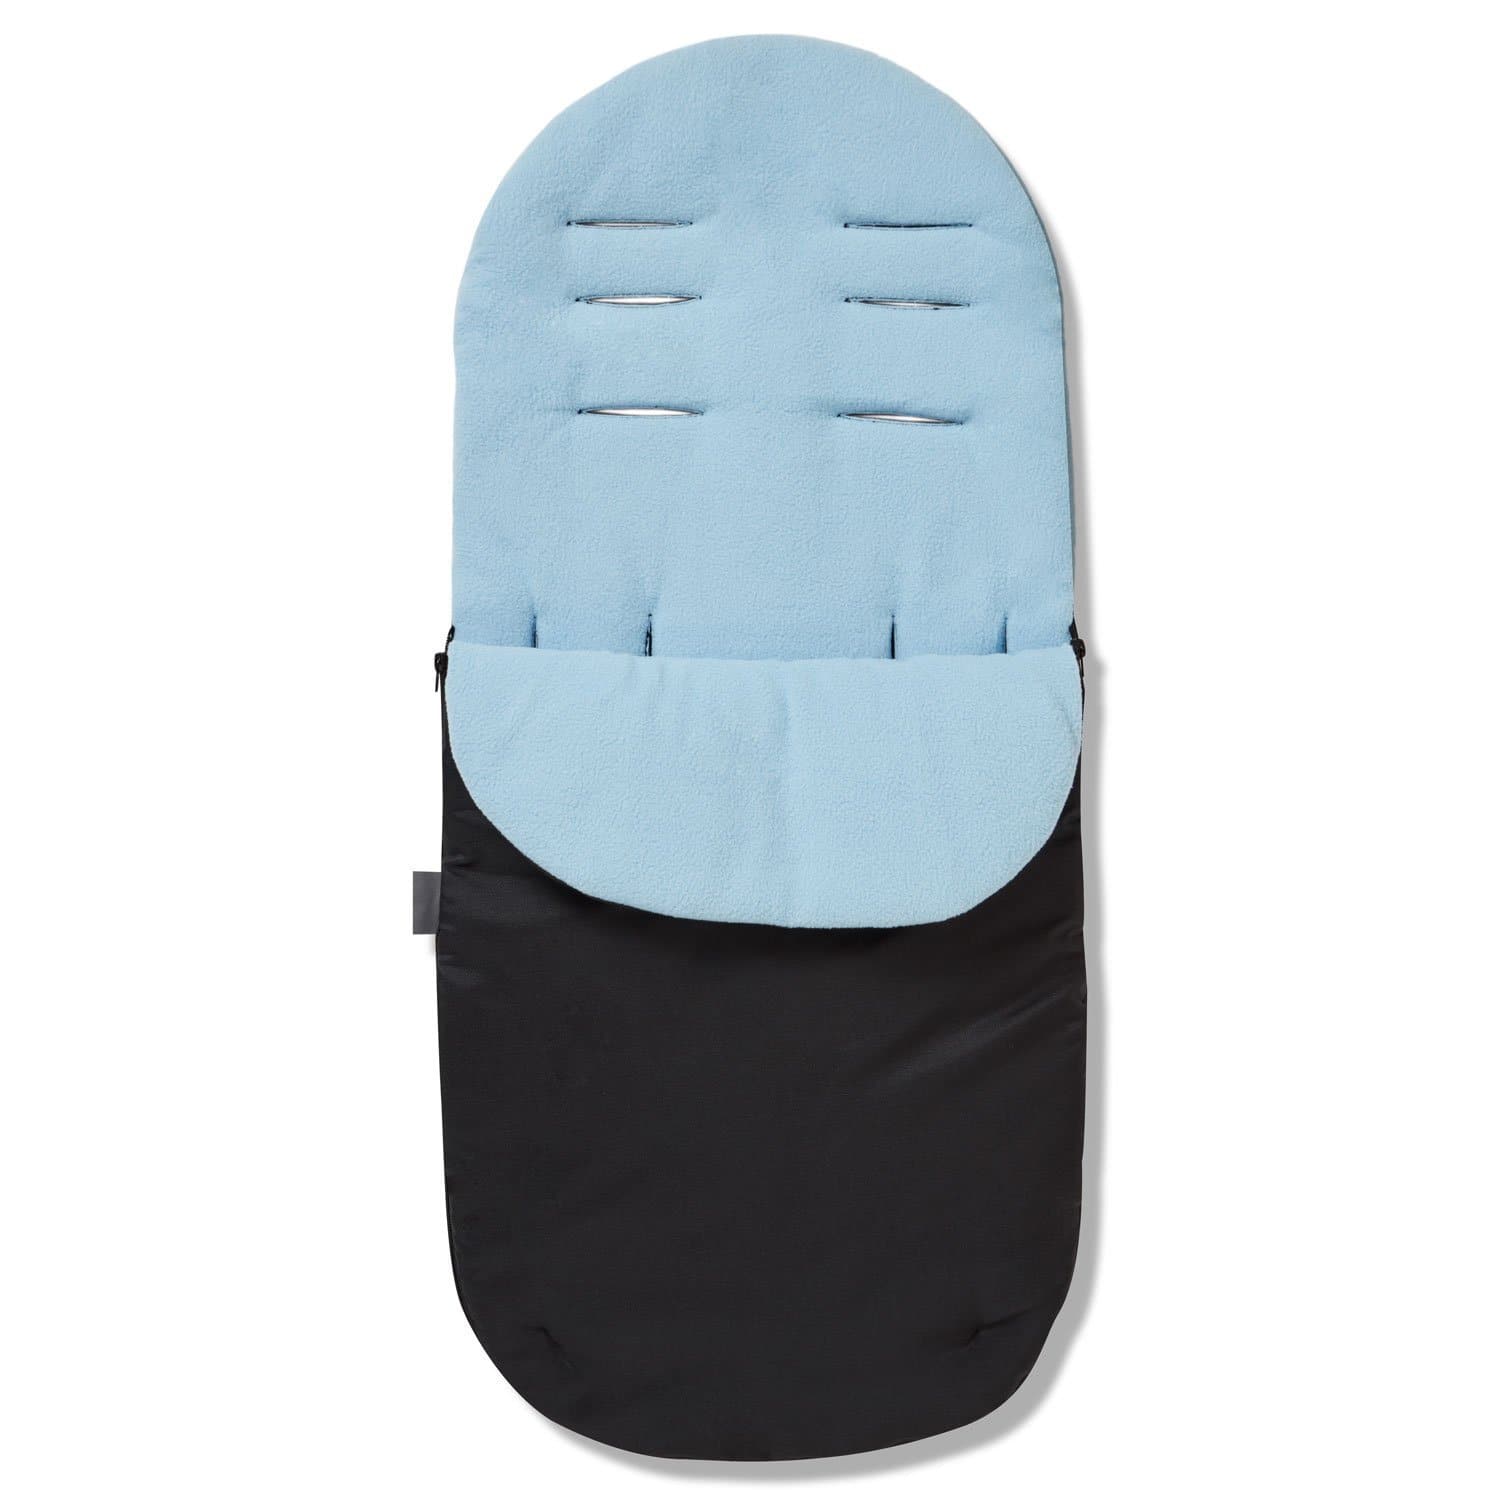 Footmuff / Cosy Toes Compatible with Joolz - For Your Little One